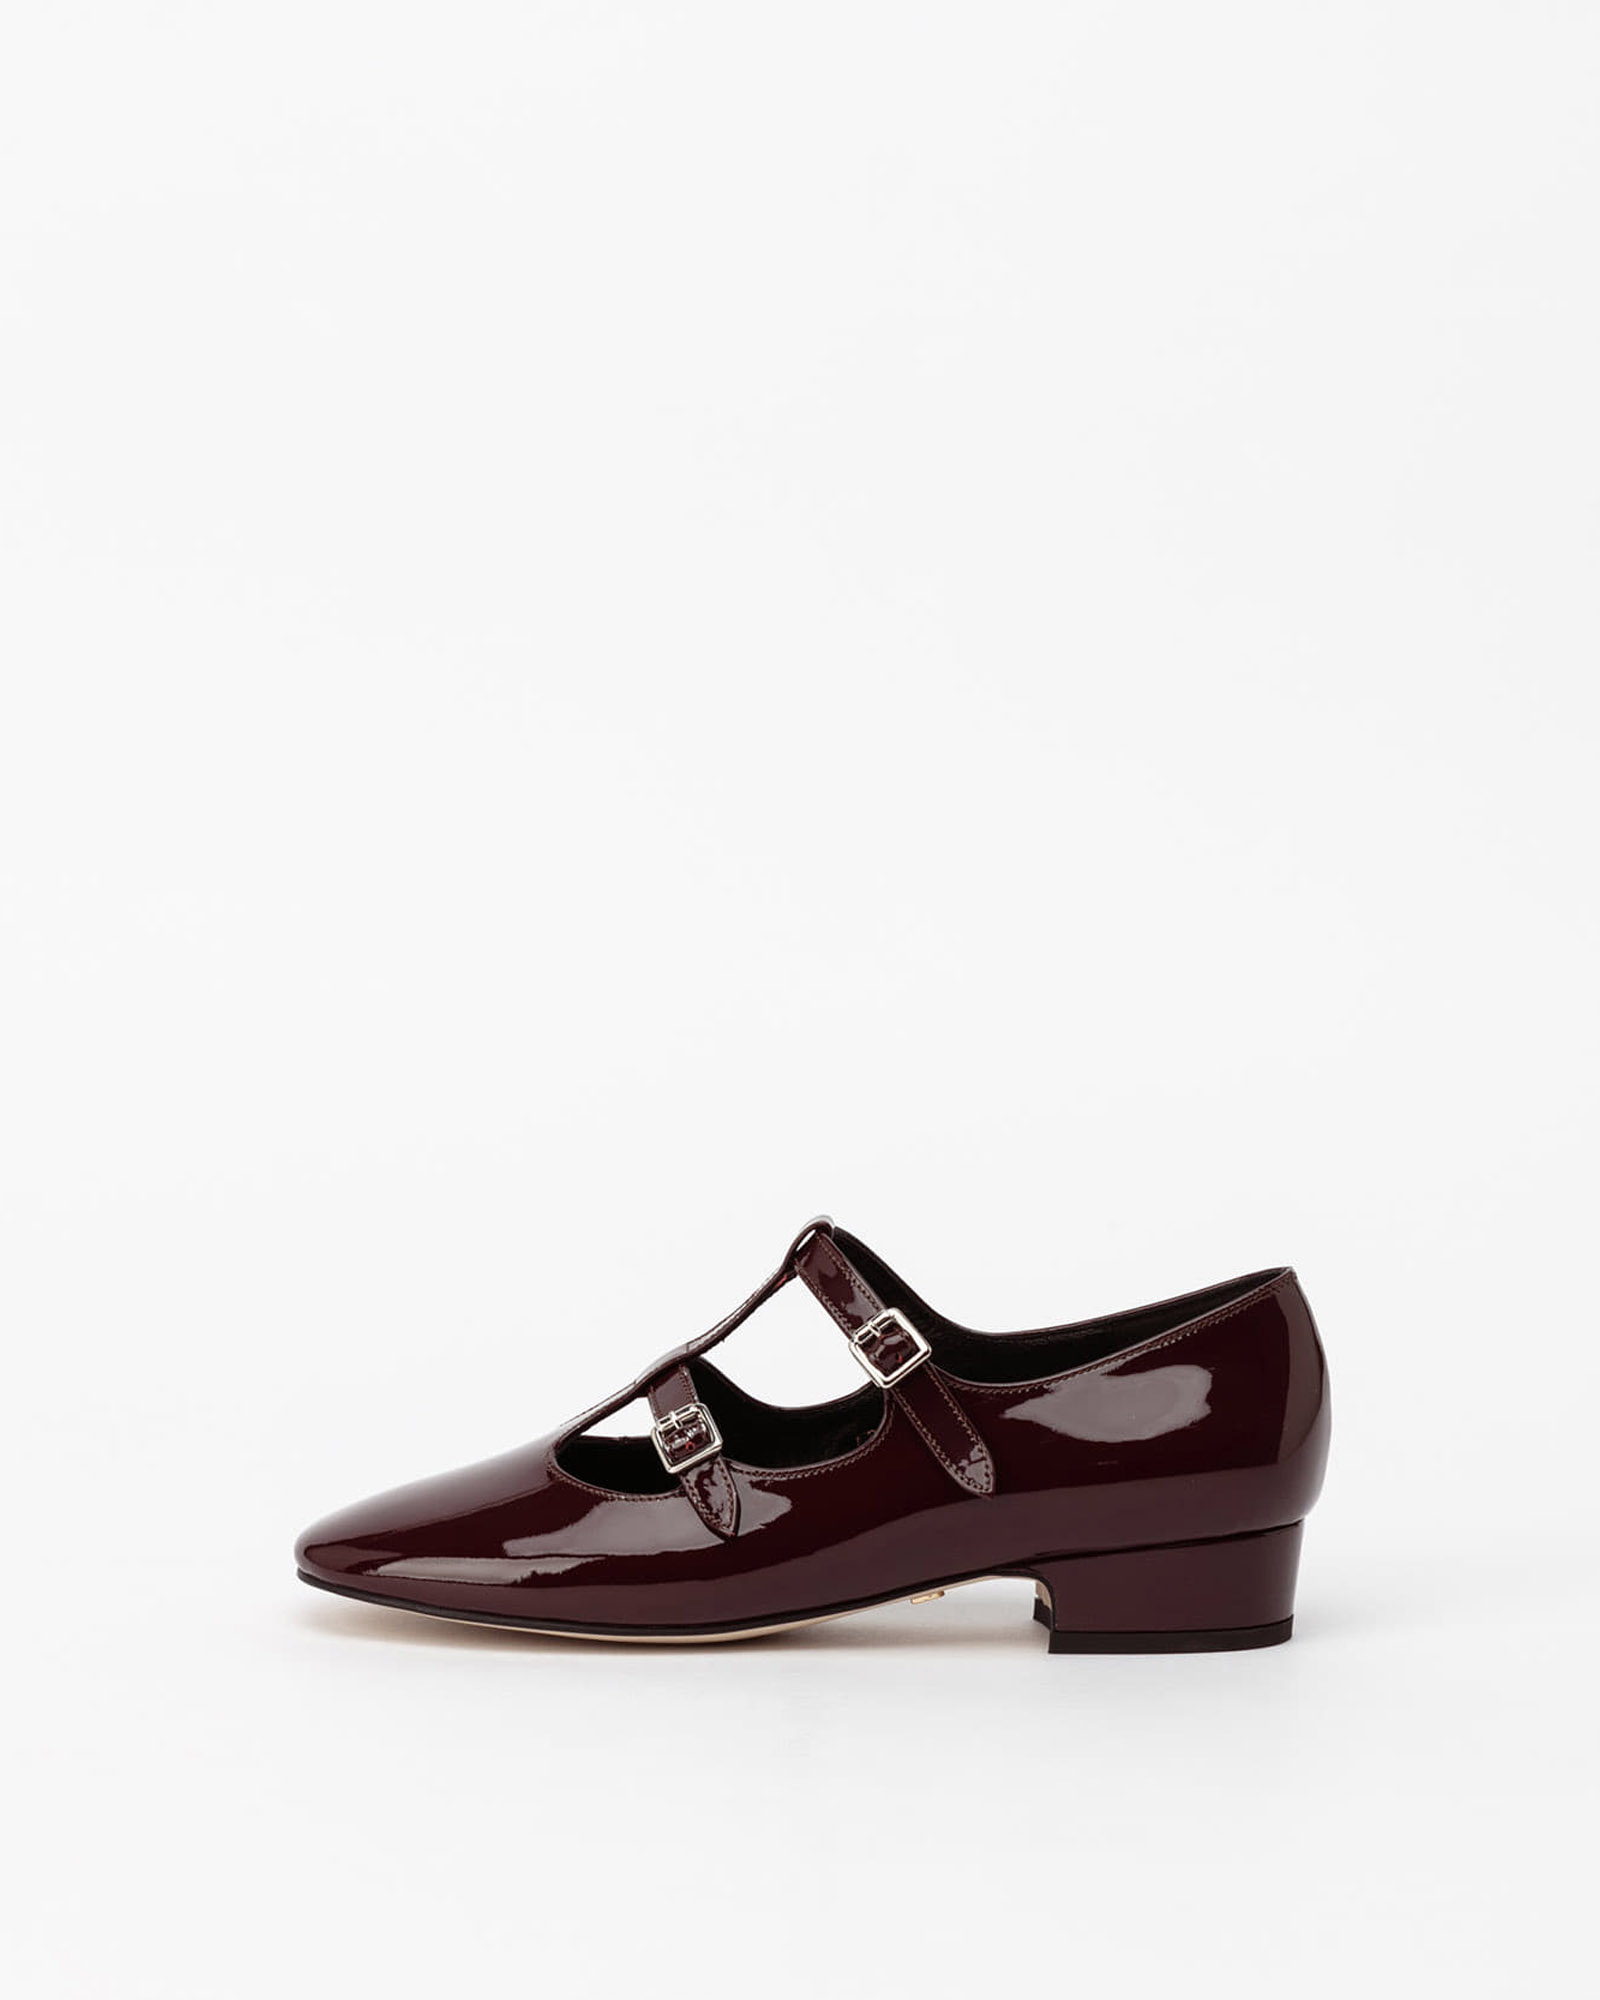 Rupin Double Strap Maryjane Flats in Cherry Wine Patent